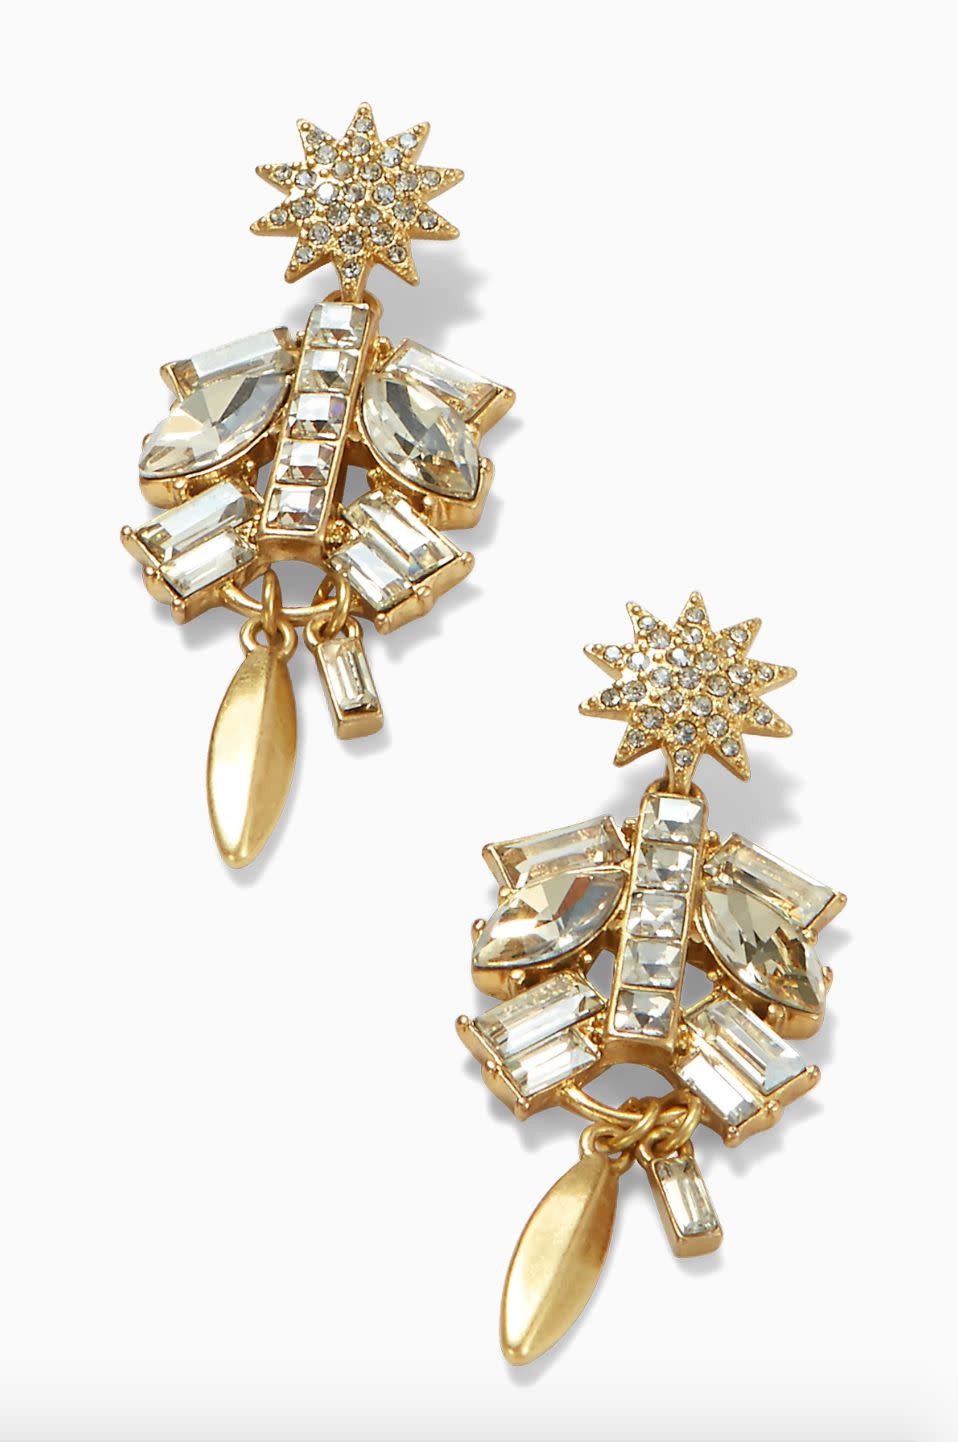 <strong><a href="https://www.stelladot.com/p/campbell-chandeliers" target="_blank" rel="noopener noreferrer">Get the Stella &amp; Dot Campbell chandelier earrings for $49</a></strong>